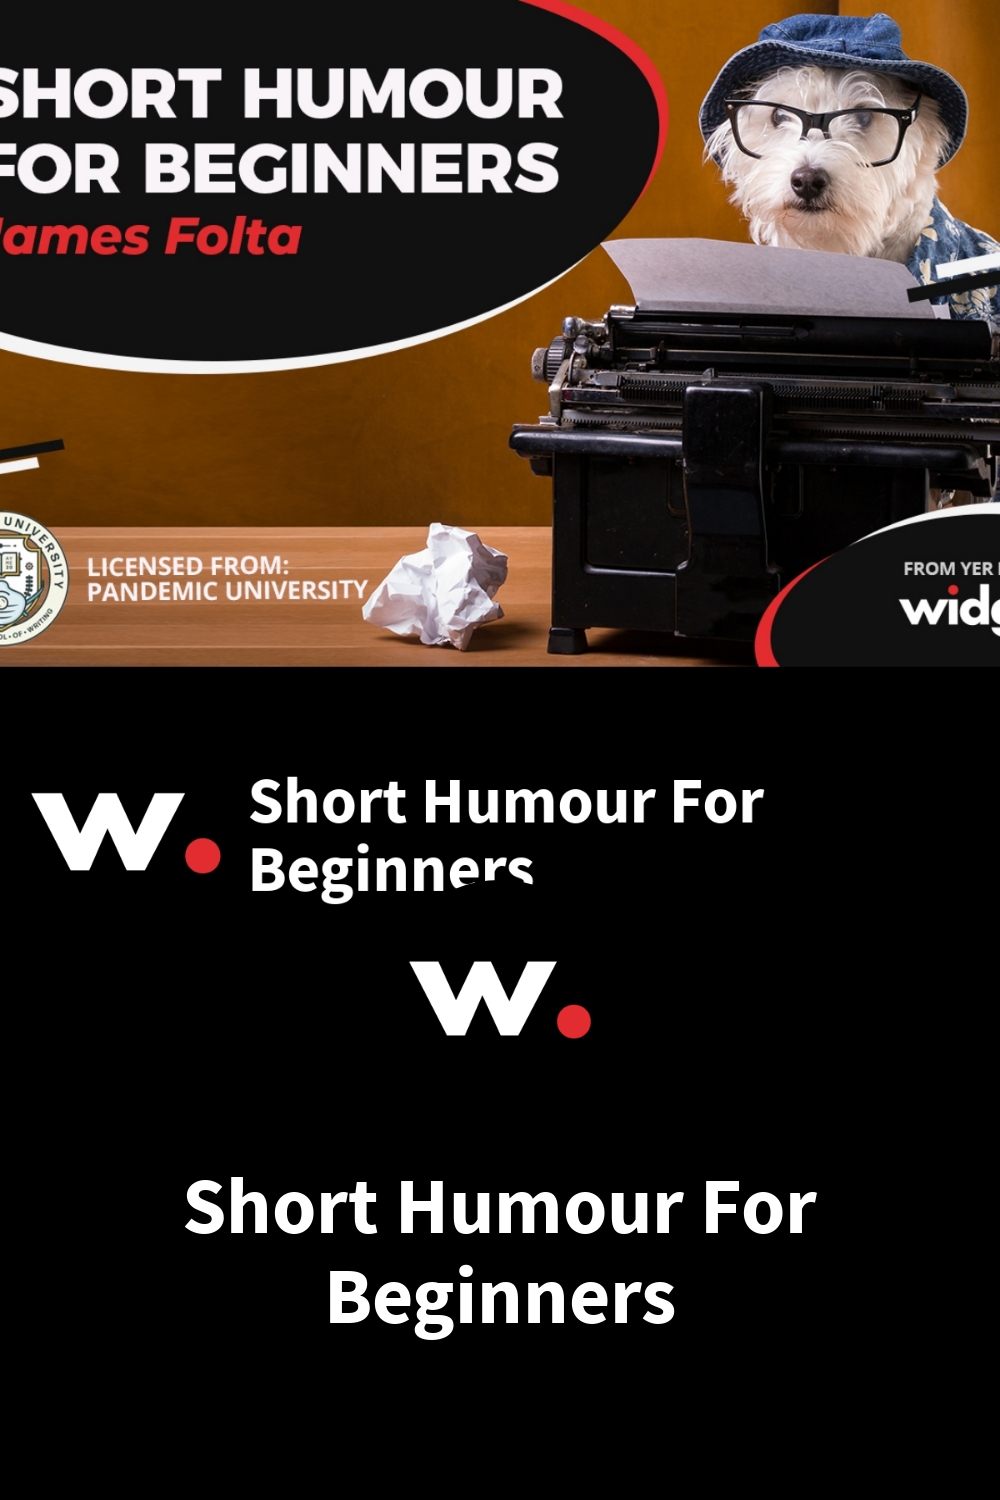 Short Humour For Beginners